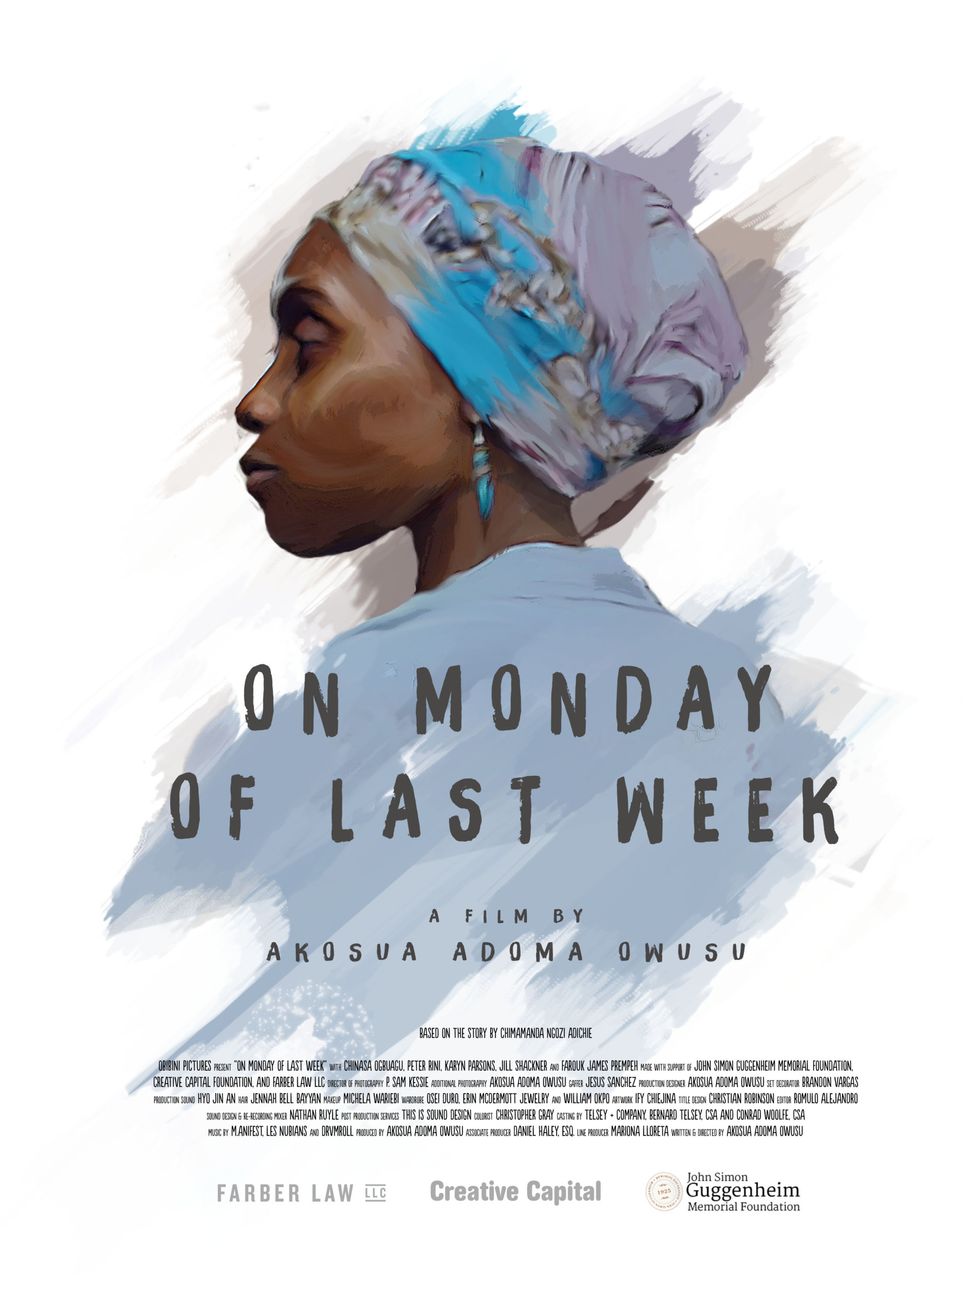 First Look: The Trailer Based on Chimamanda Ngozi Adichie's 'On Monday of Last Week' Is Here